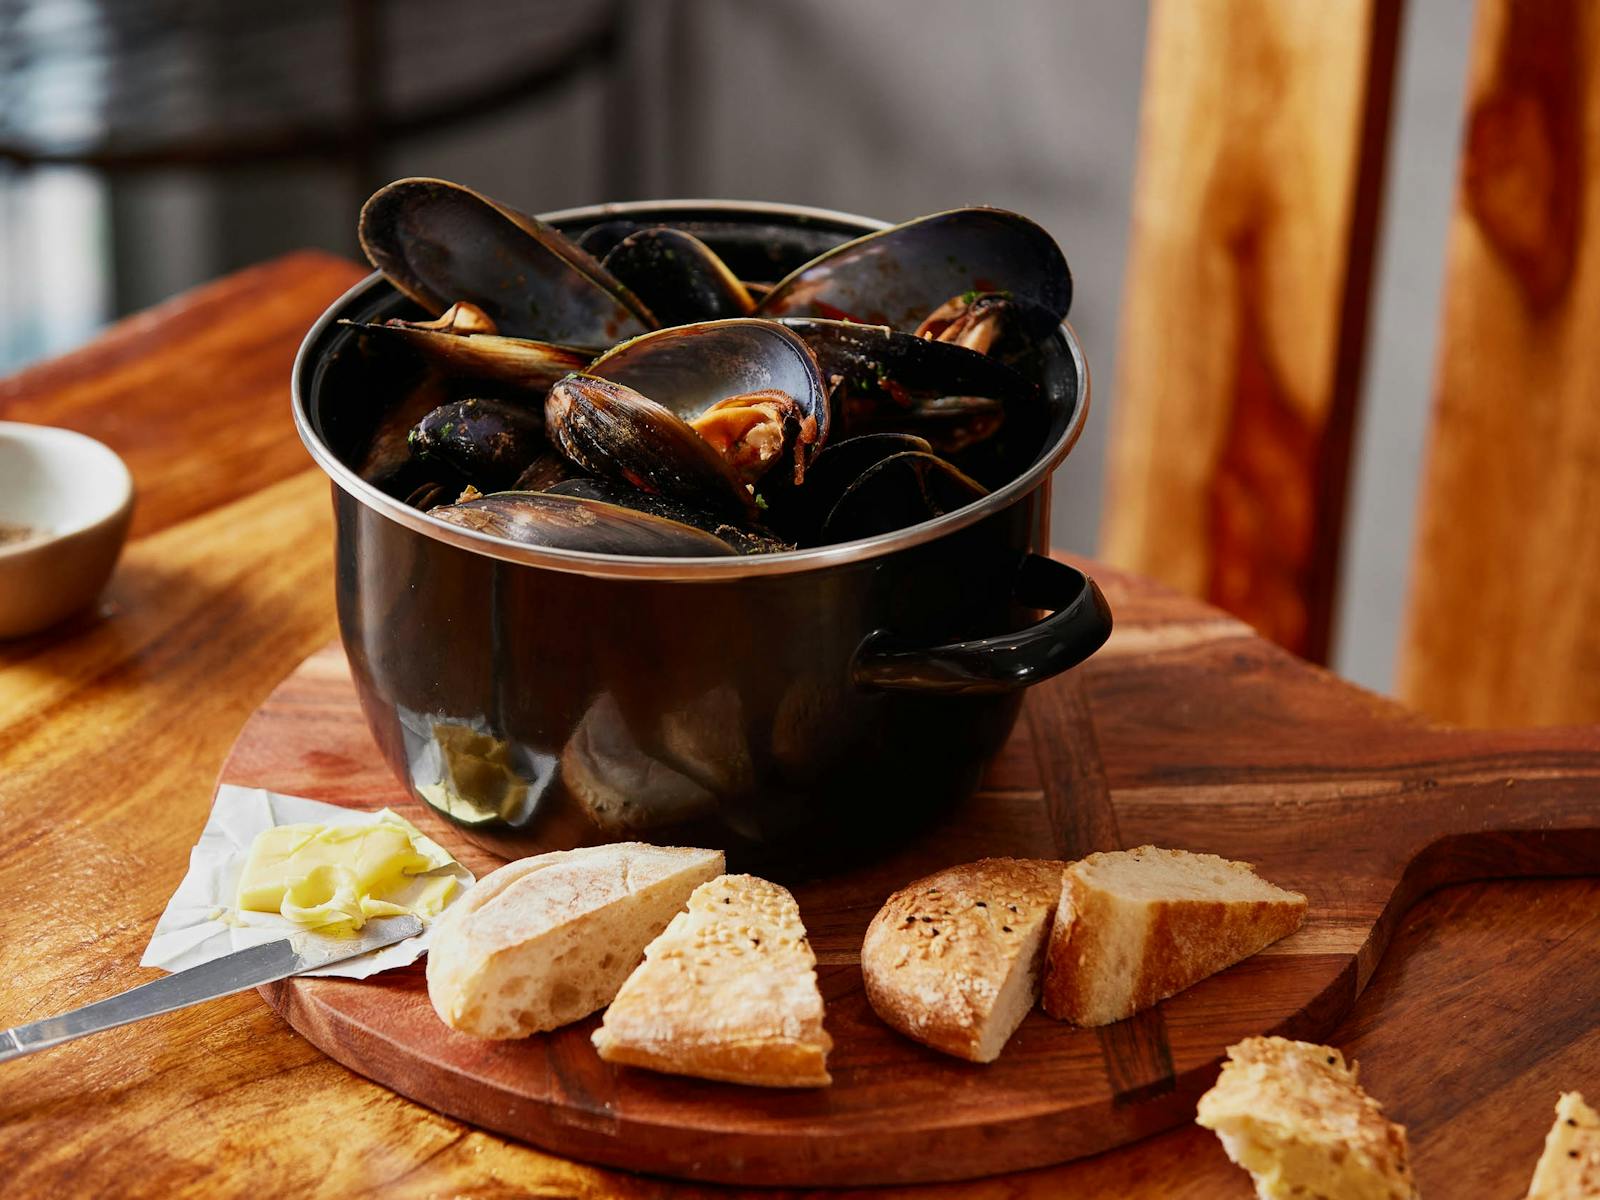 A pot of mussels, covered with a chilli sauce and served with bread slices and butter on the side